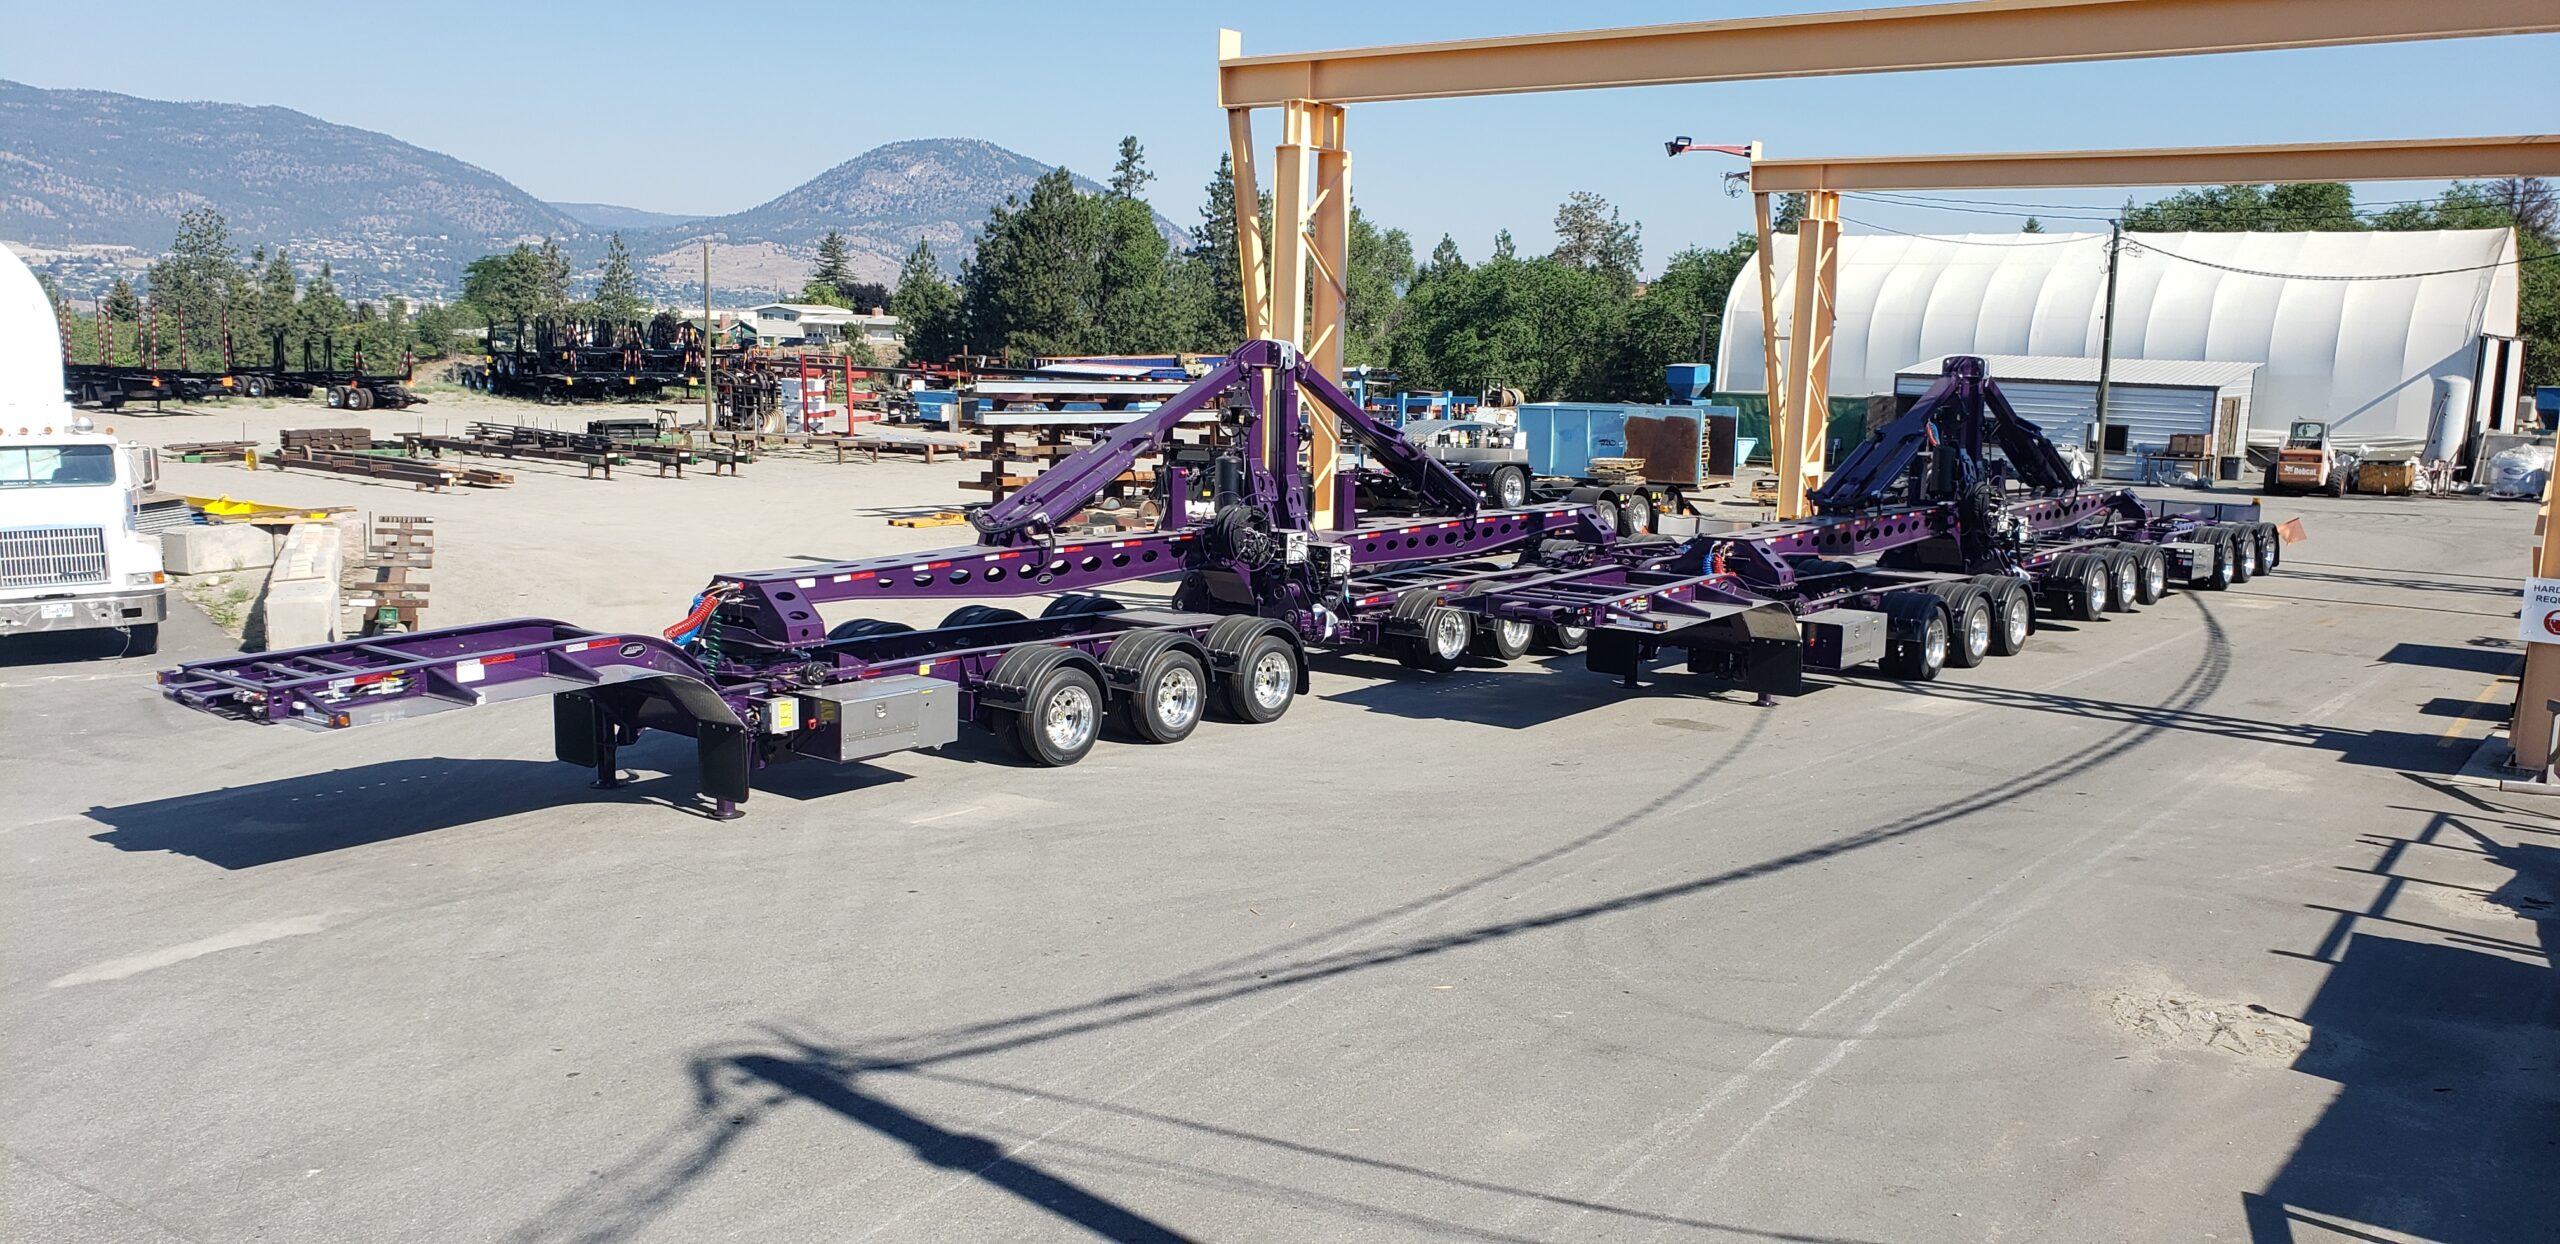 Double schnabel trailer for sale with purple finish